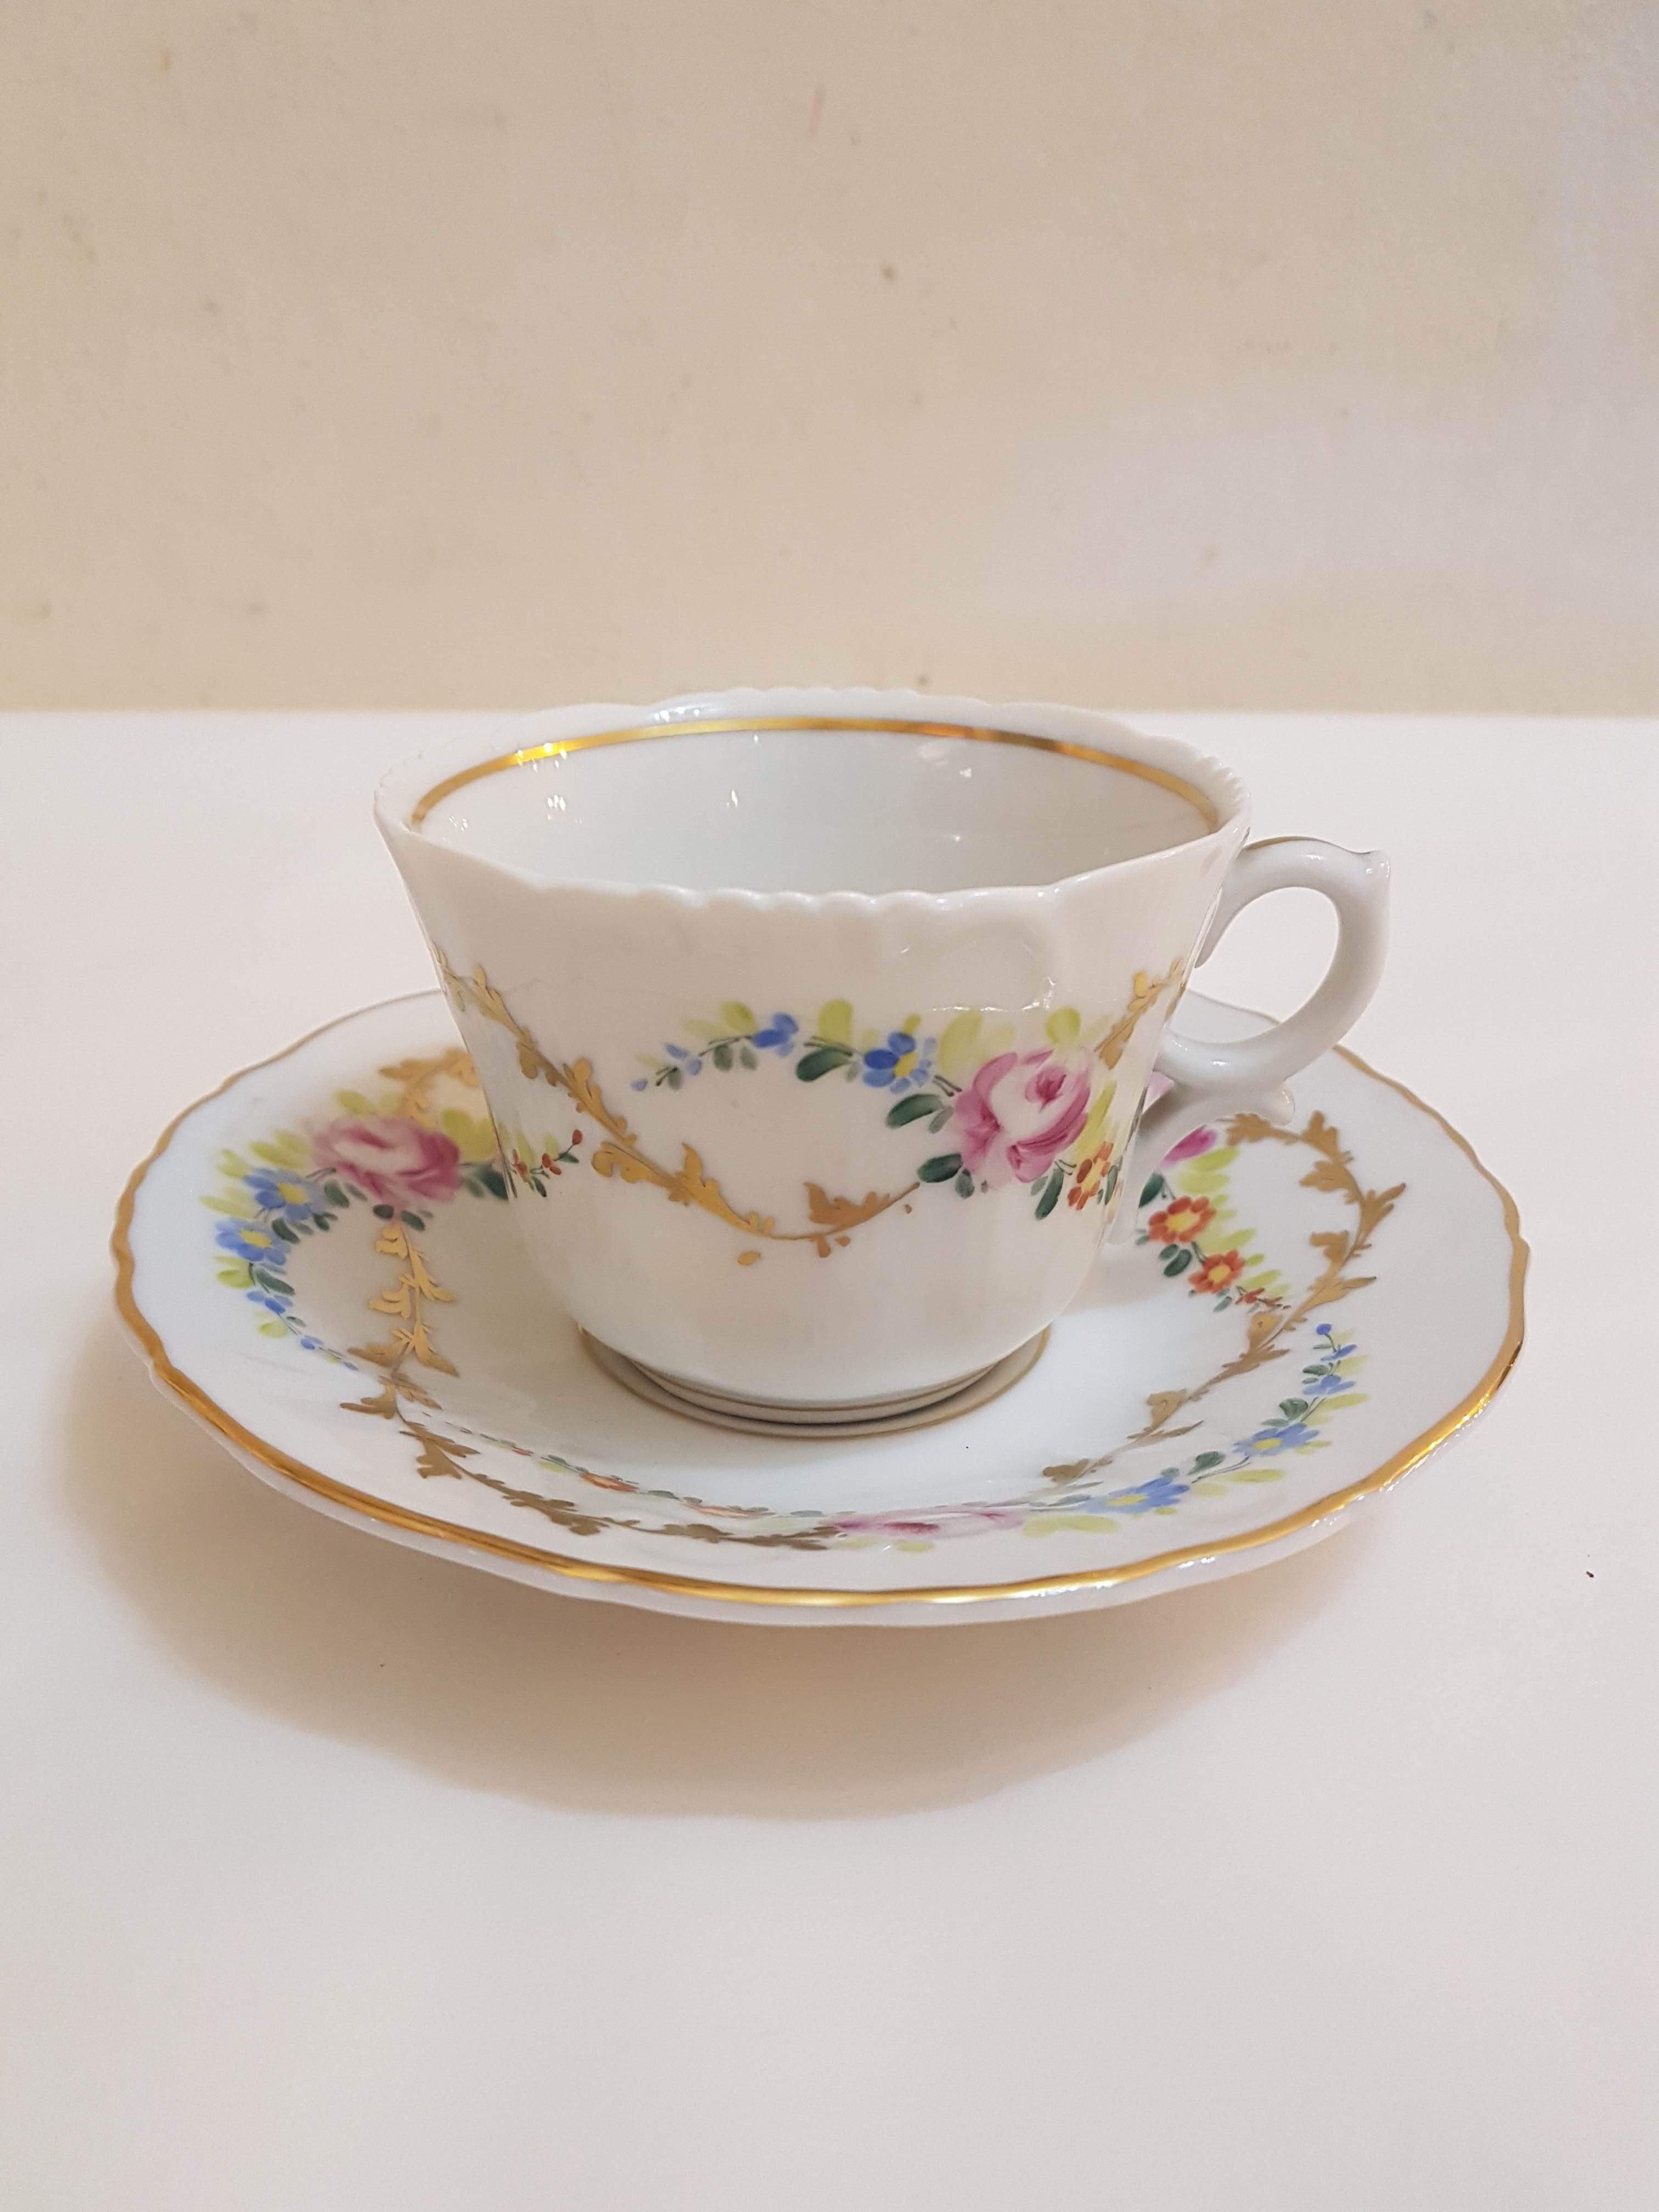 Victorian 20th Century Hand-Painted Vista Alegre Porcelain Collectible Tea Cup and Saucer